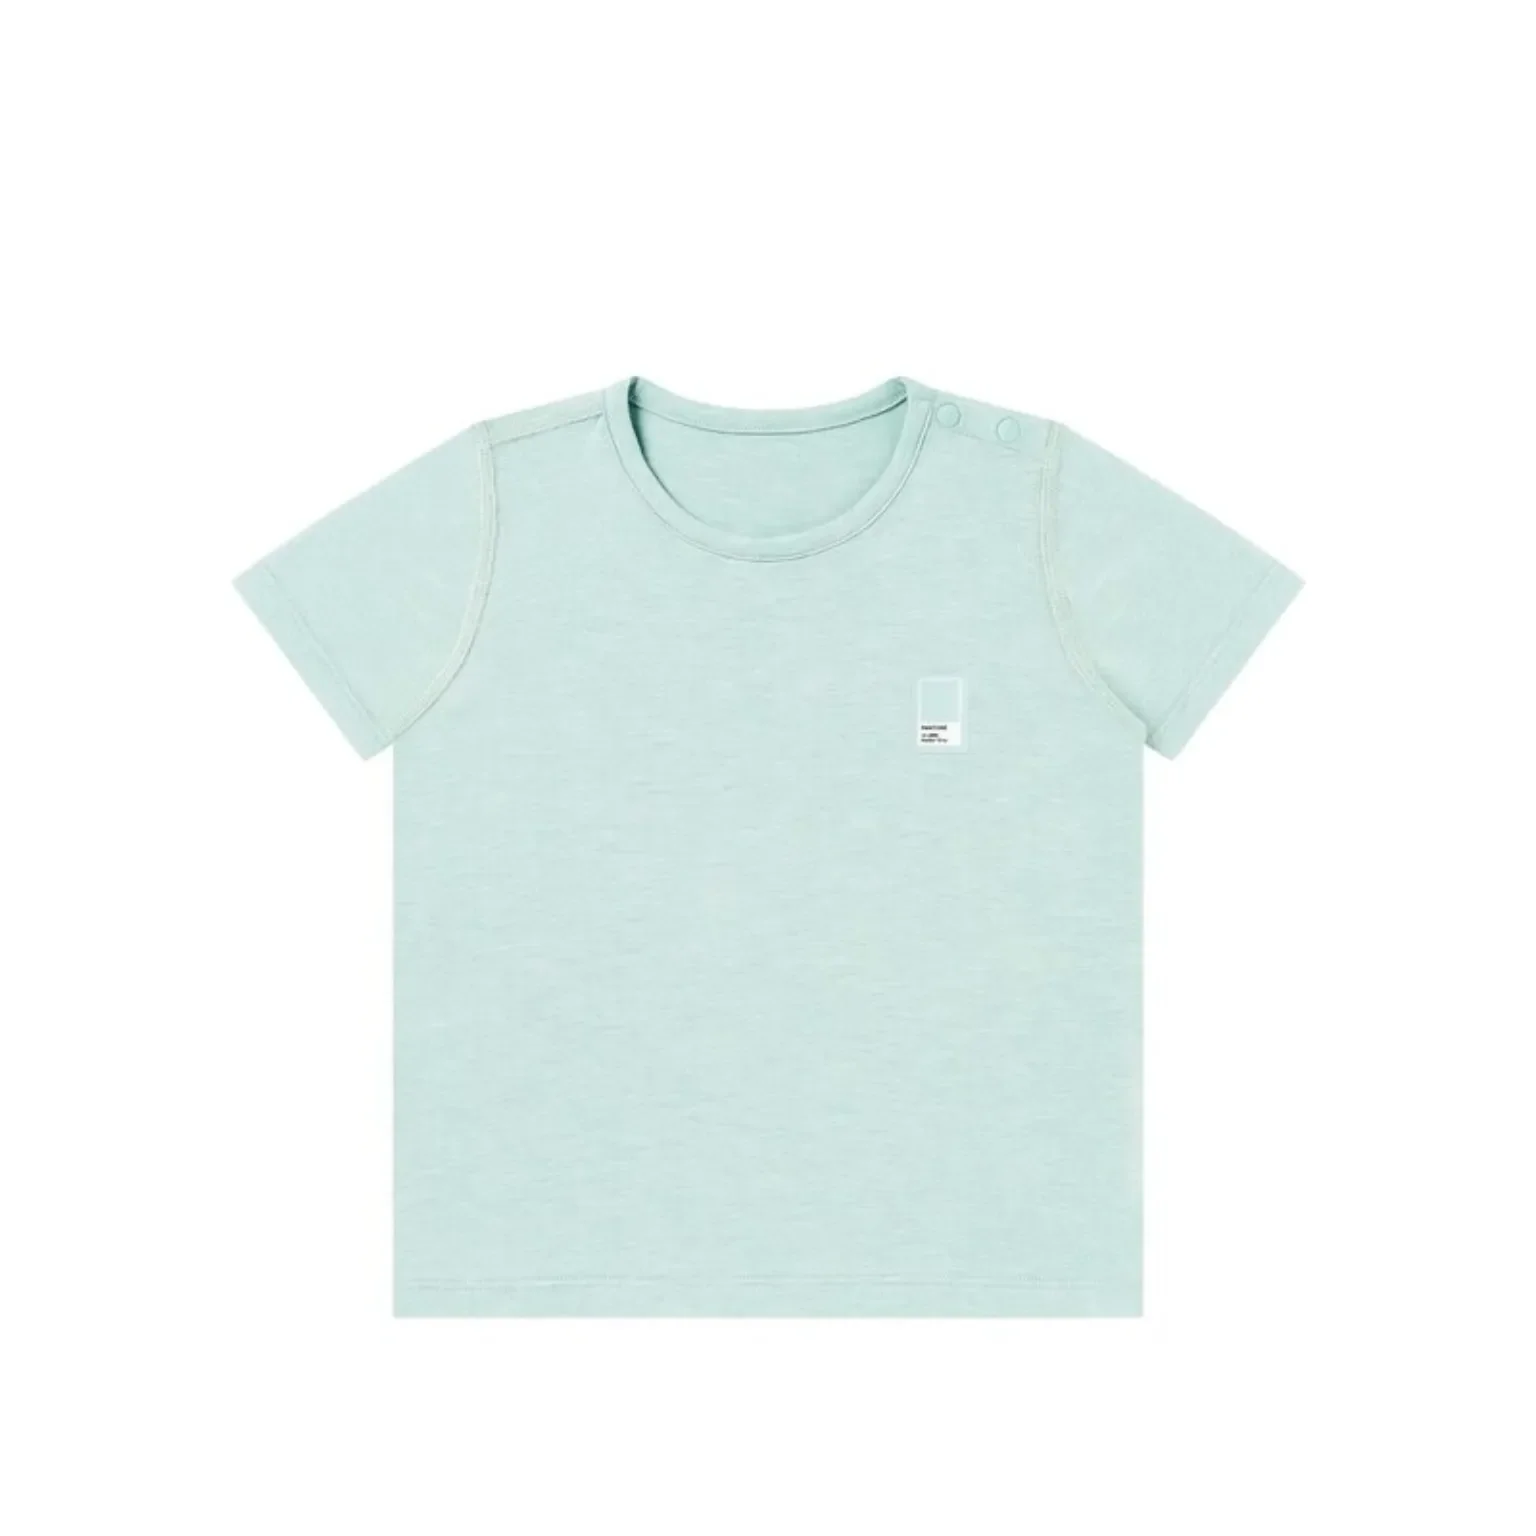 Eco-friendly OEM/ODM manufacturing service for Girls Short Sleeve T-Shirt.